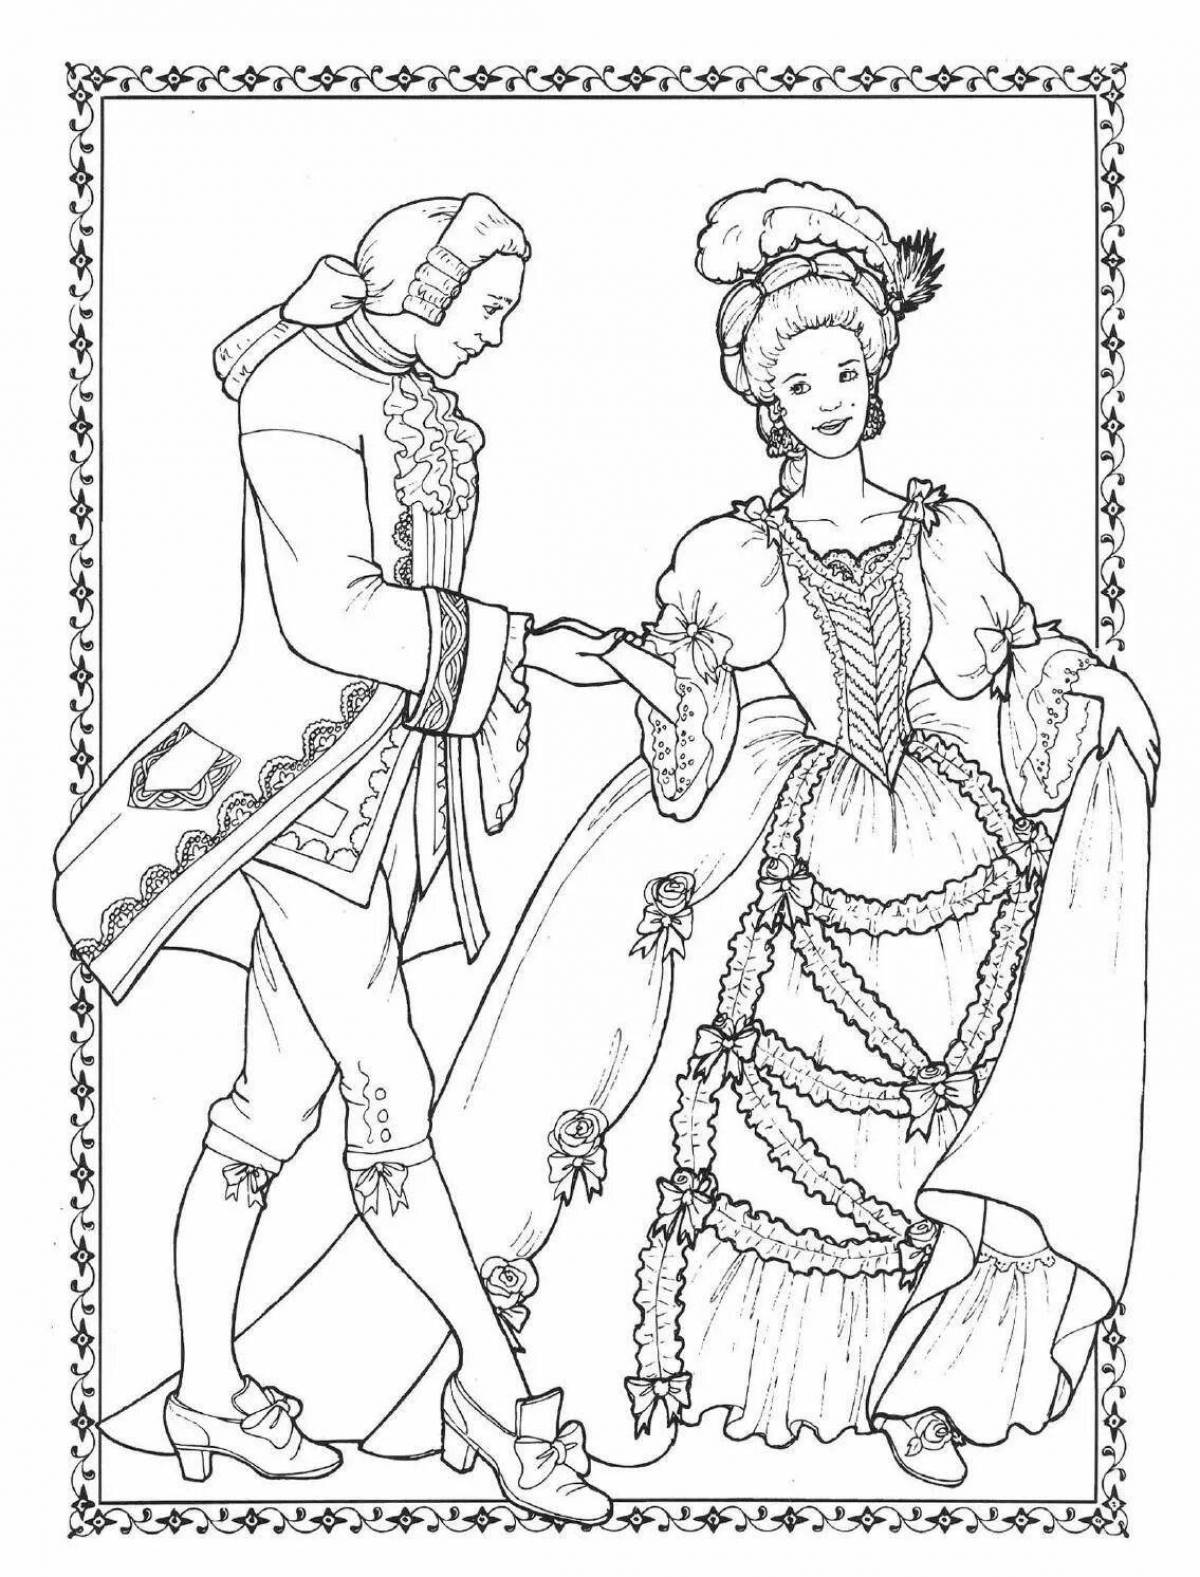 Colorful 18th century costume coloring page